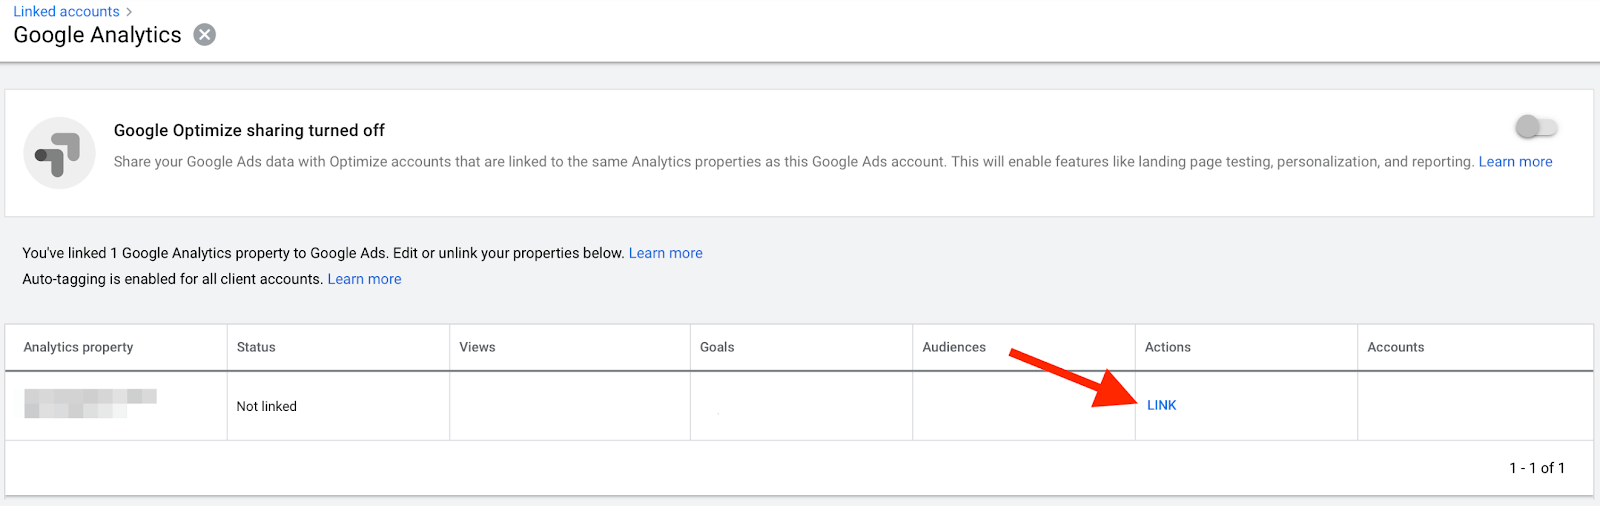 Picture describes how to track Google Ads goals in Google Analytics